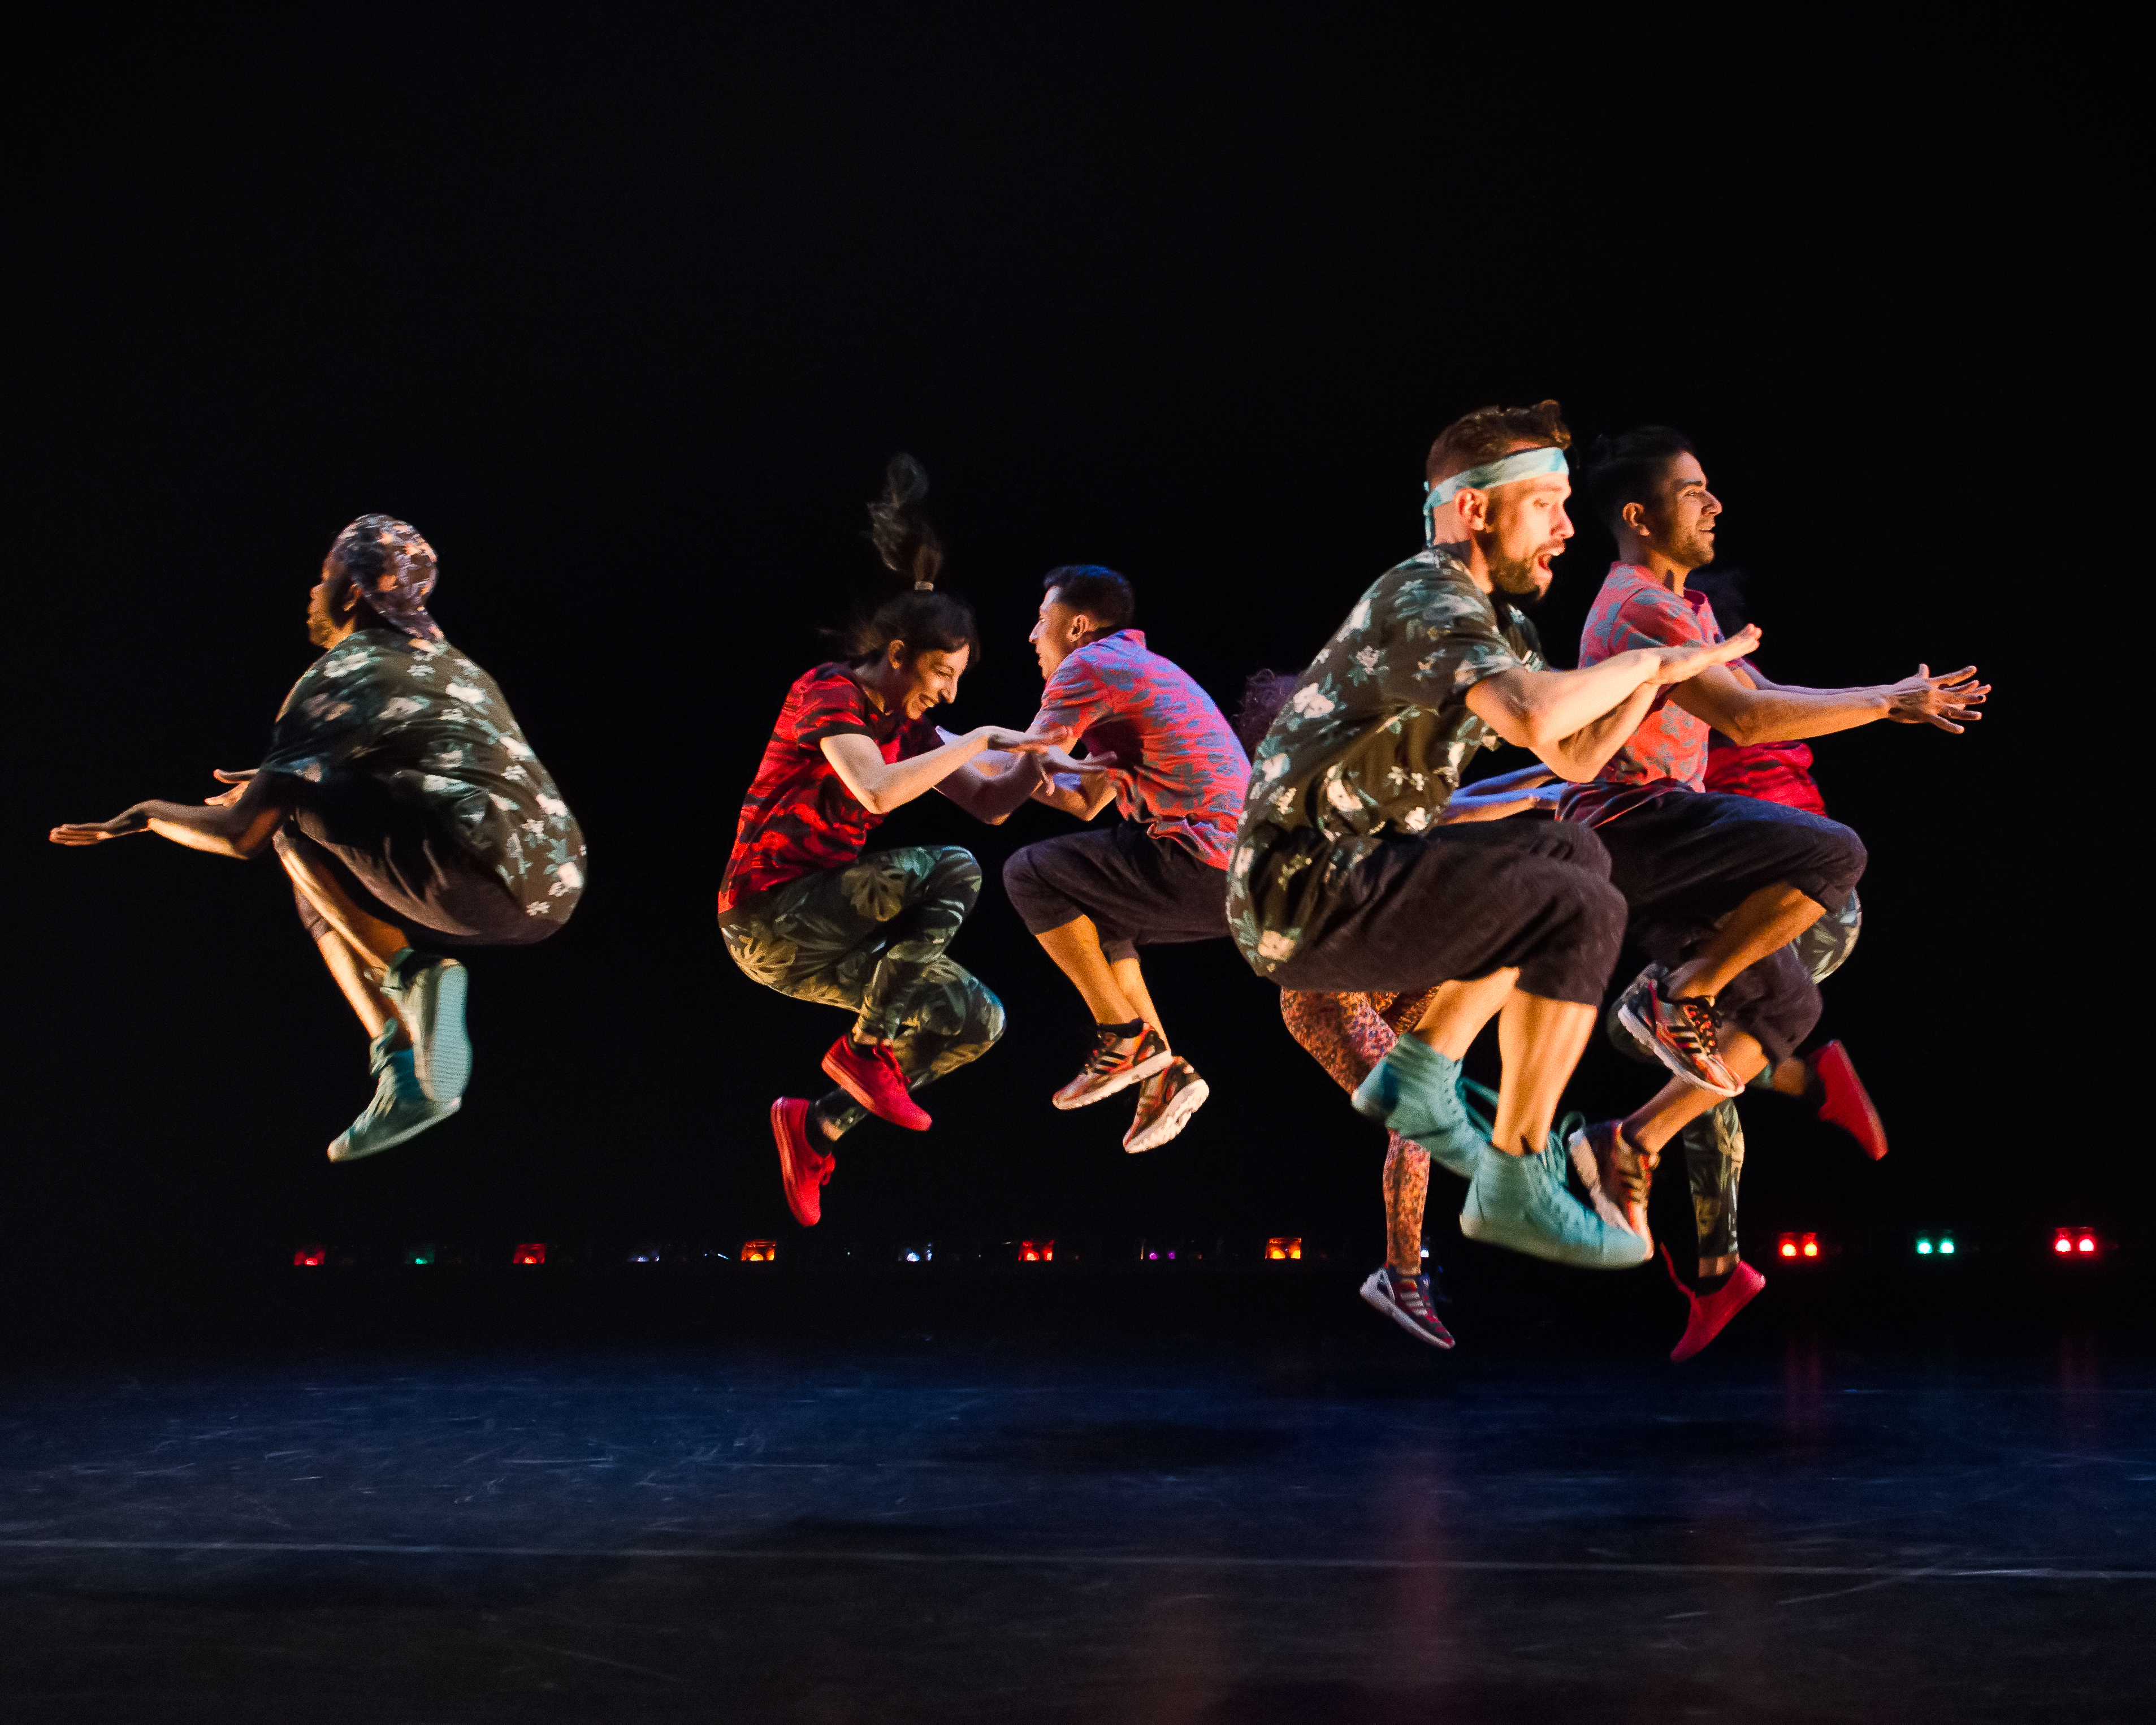 7 dancers in colorful clothing jump in unison.